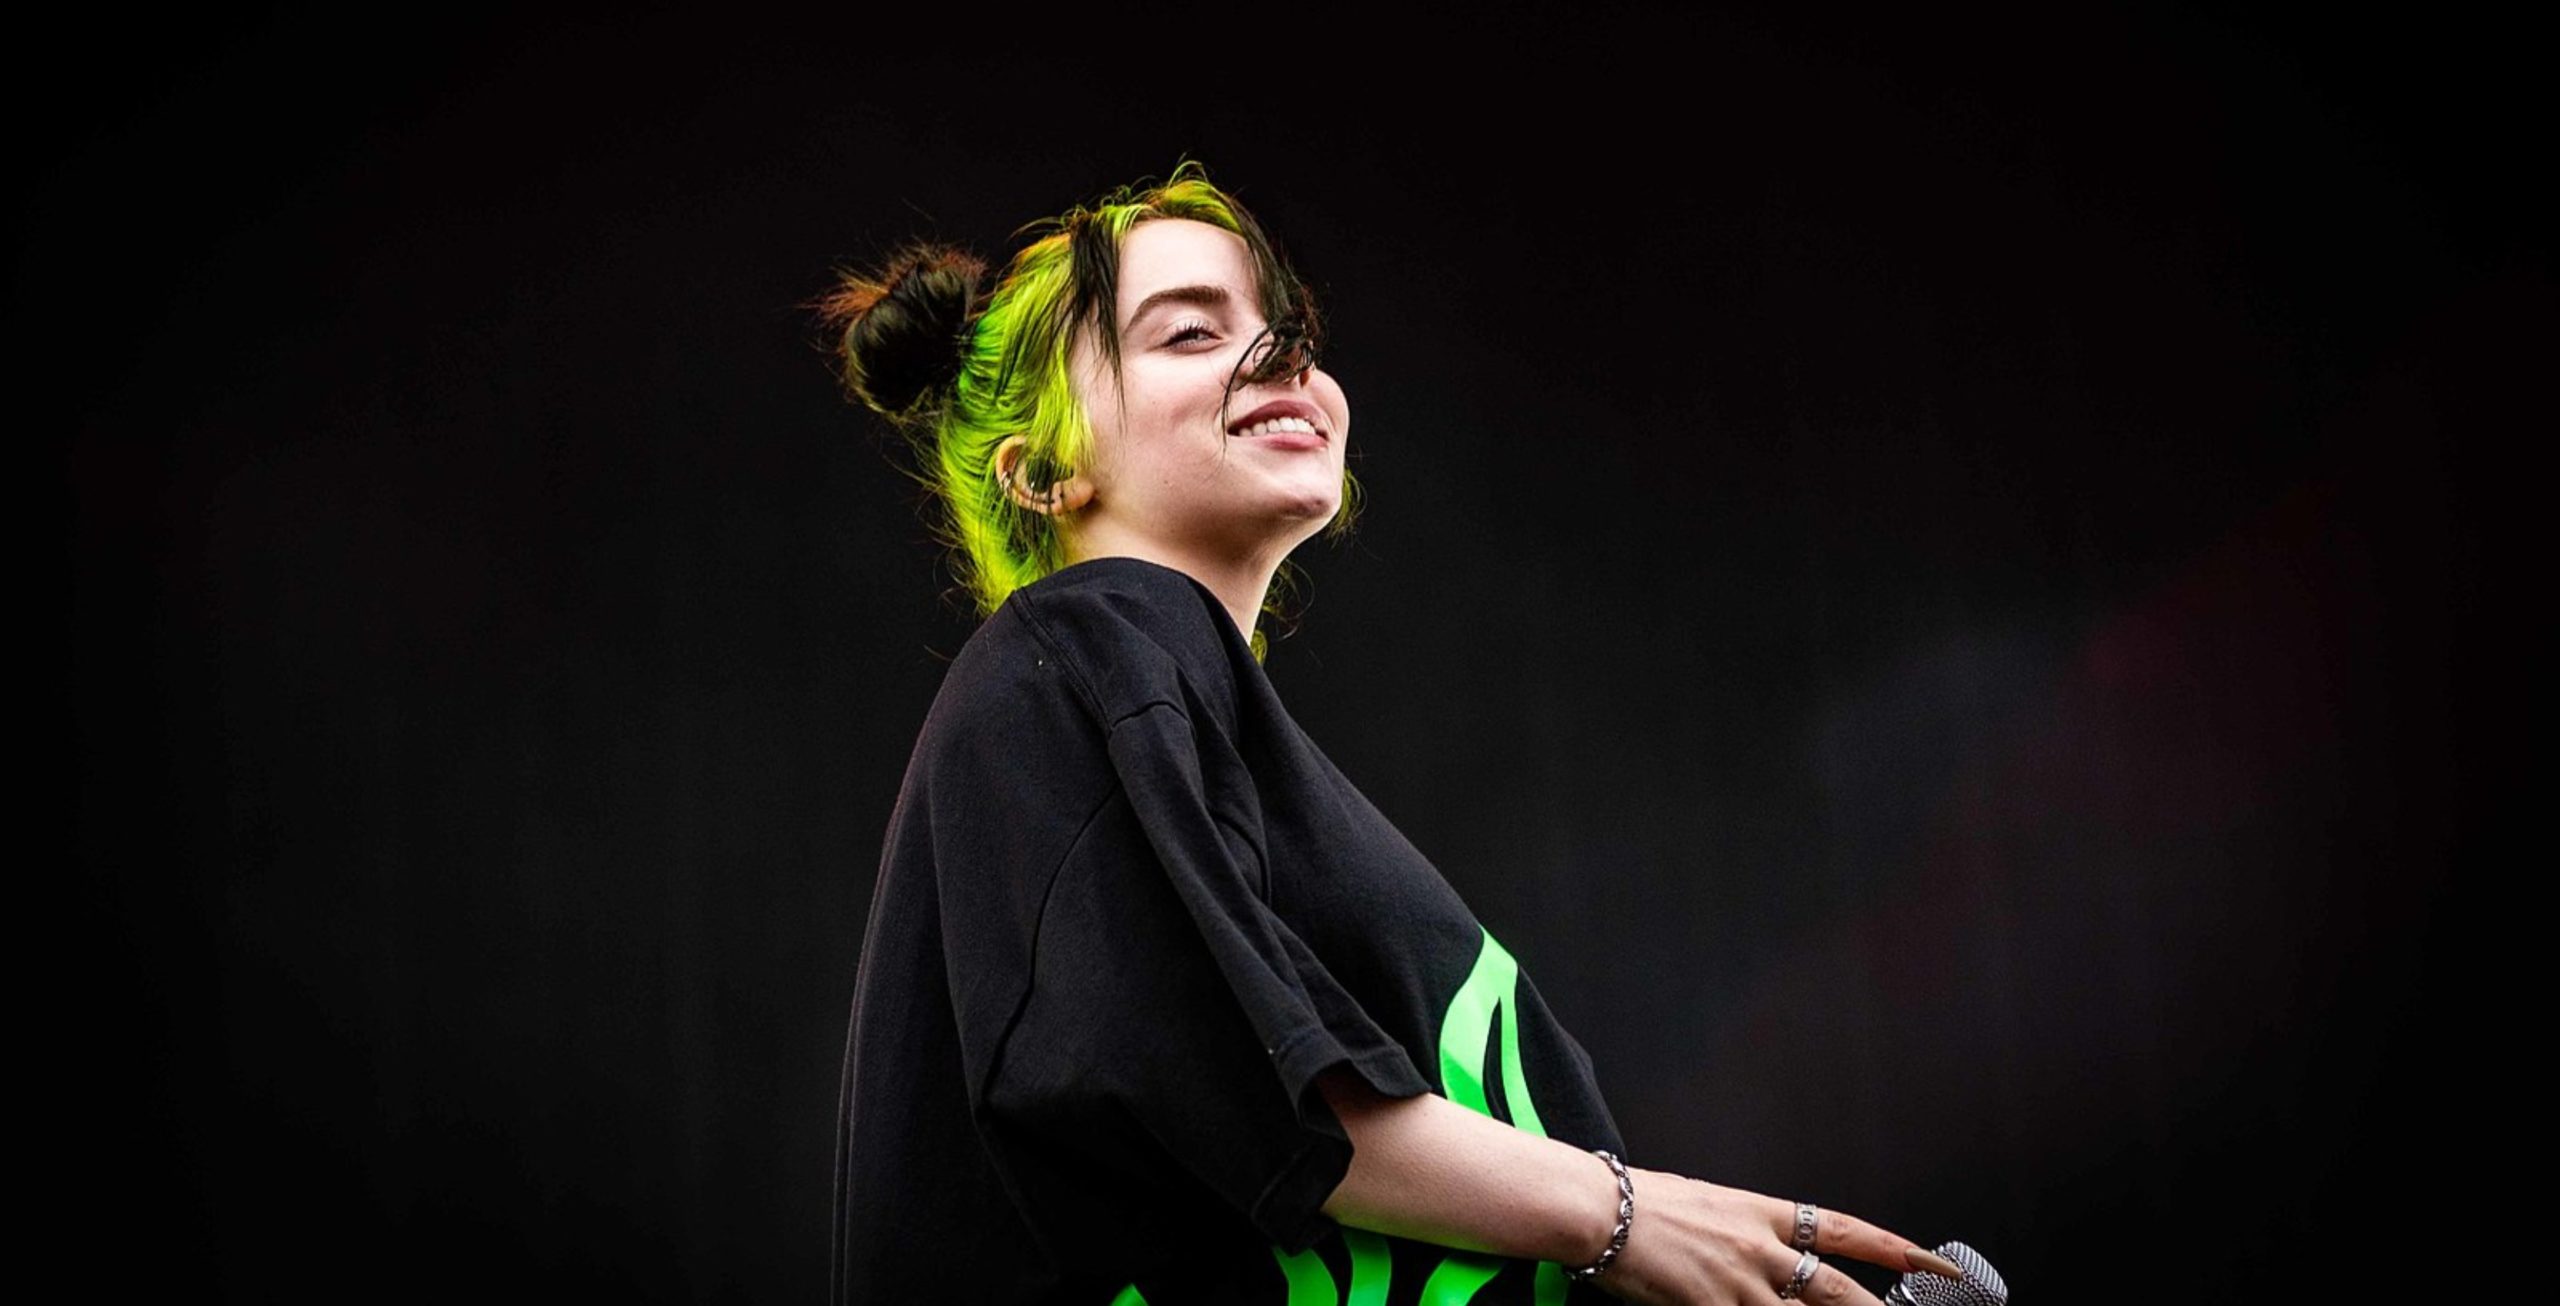 Apple selling limited-edition Billie Eilish Gift Card following TV+  documentary release - 9to5Mac